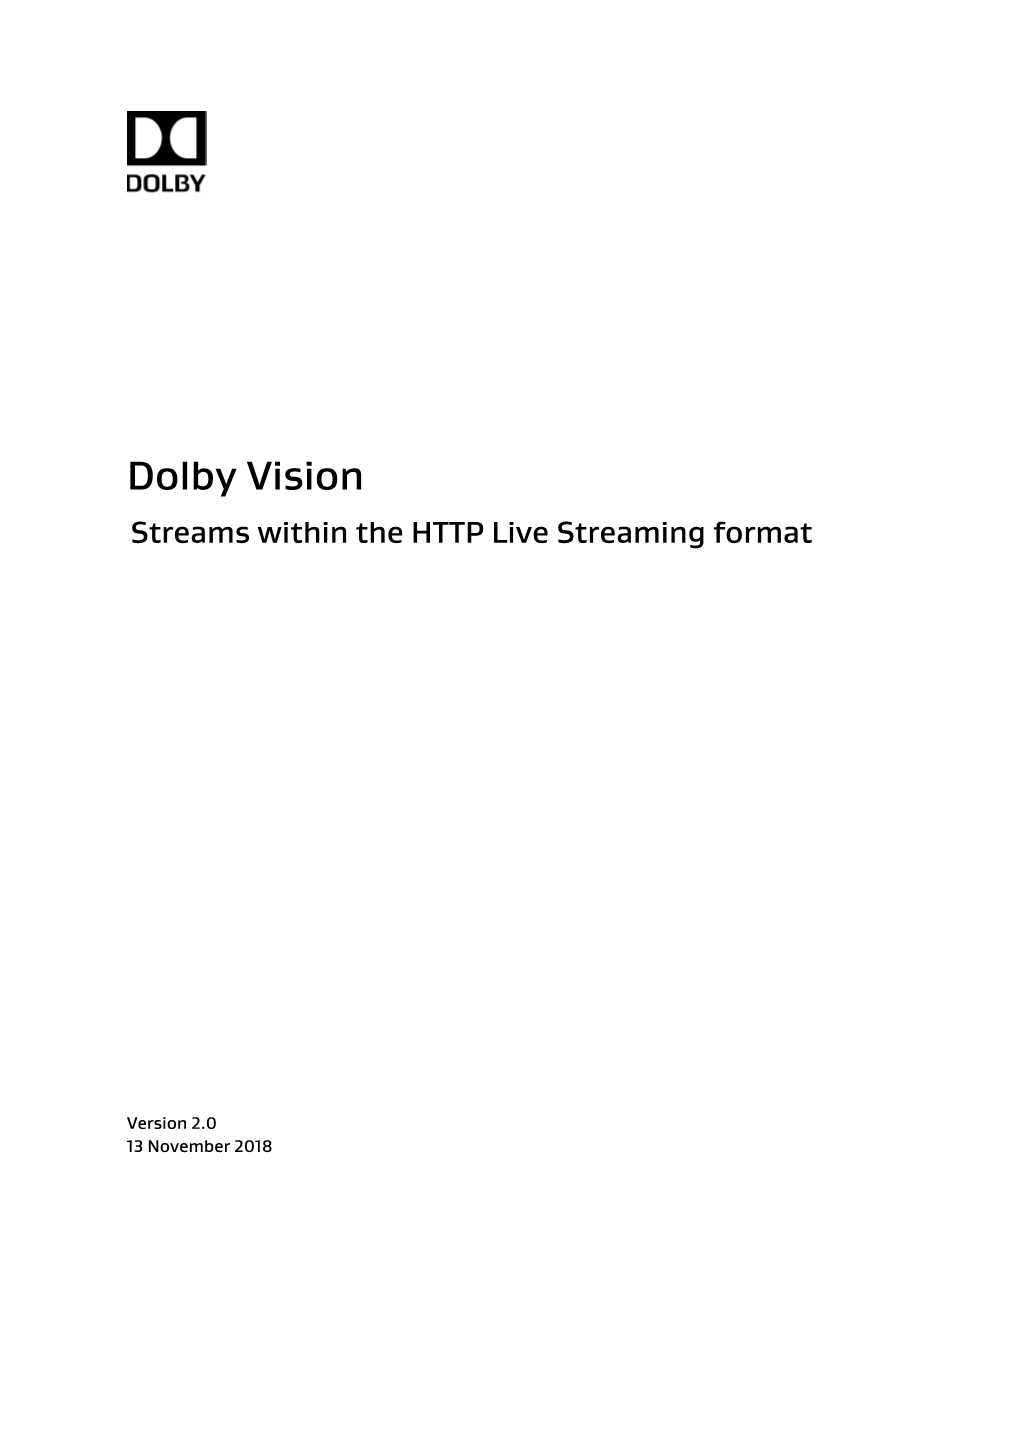 Dolby Vision Streams Within the HTTP Live Streaming Format